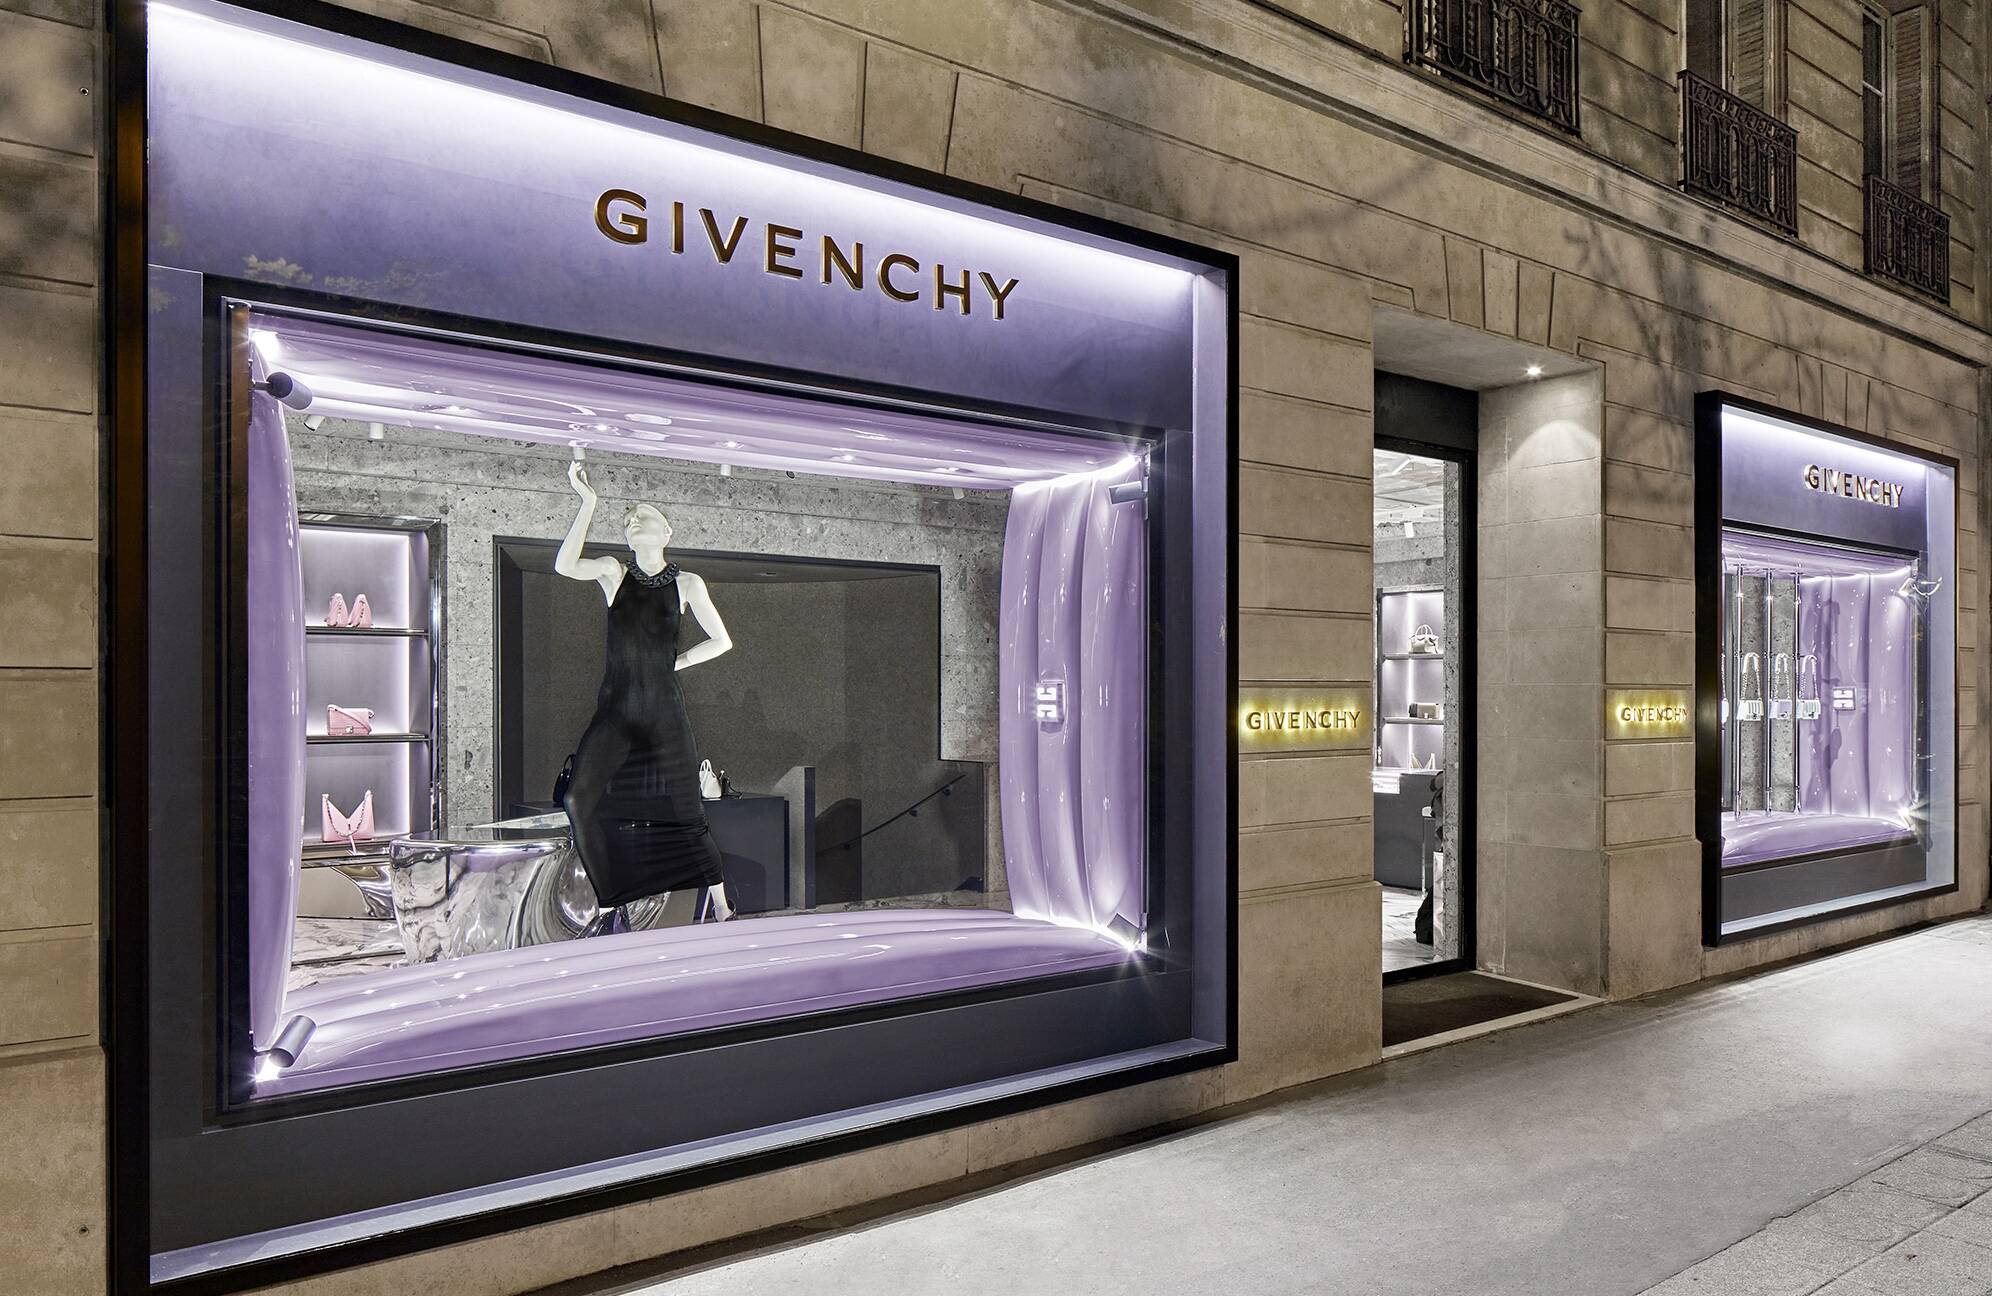 Givenchy - Paris Givenchy is an international luxury brand